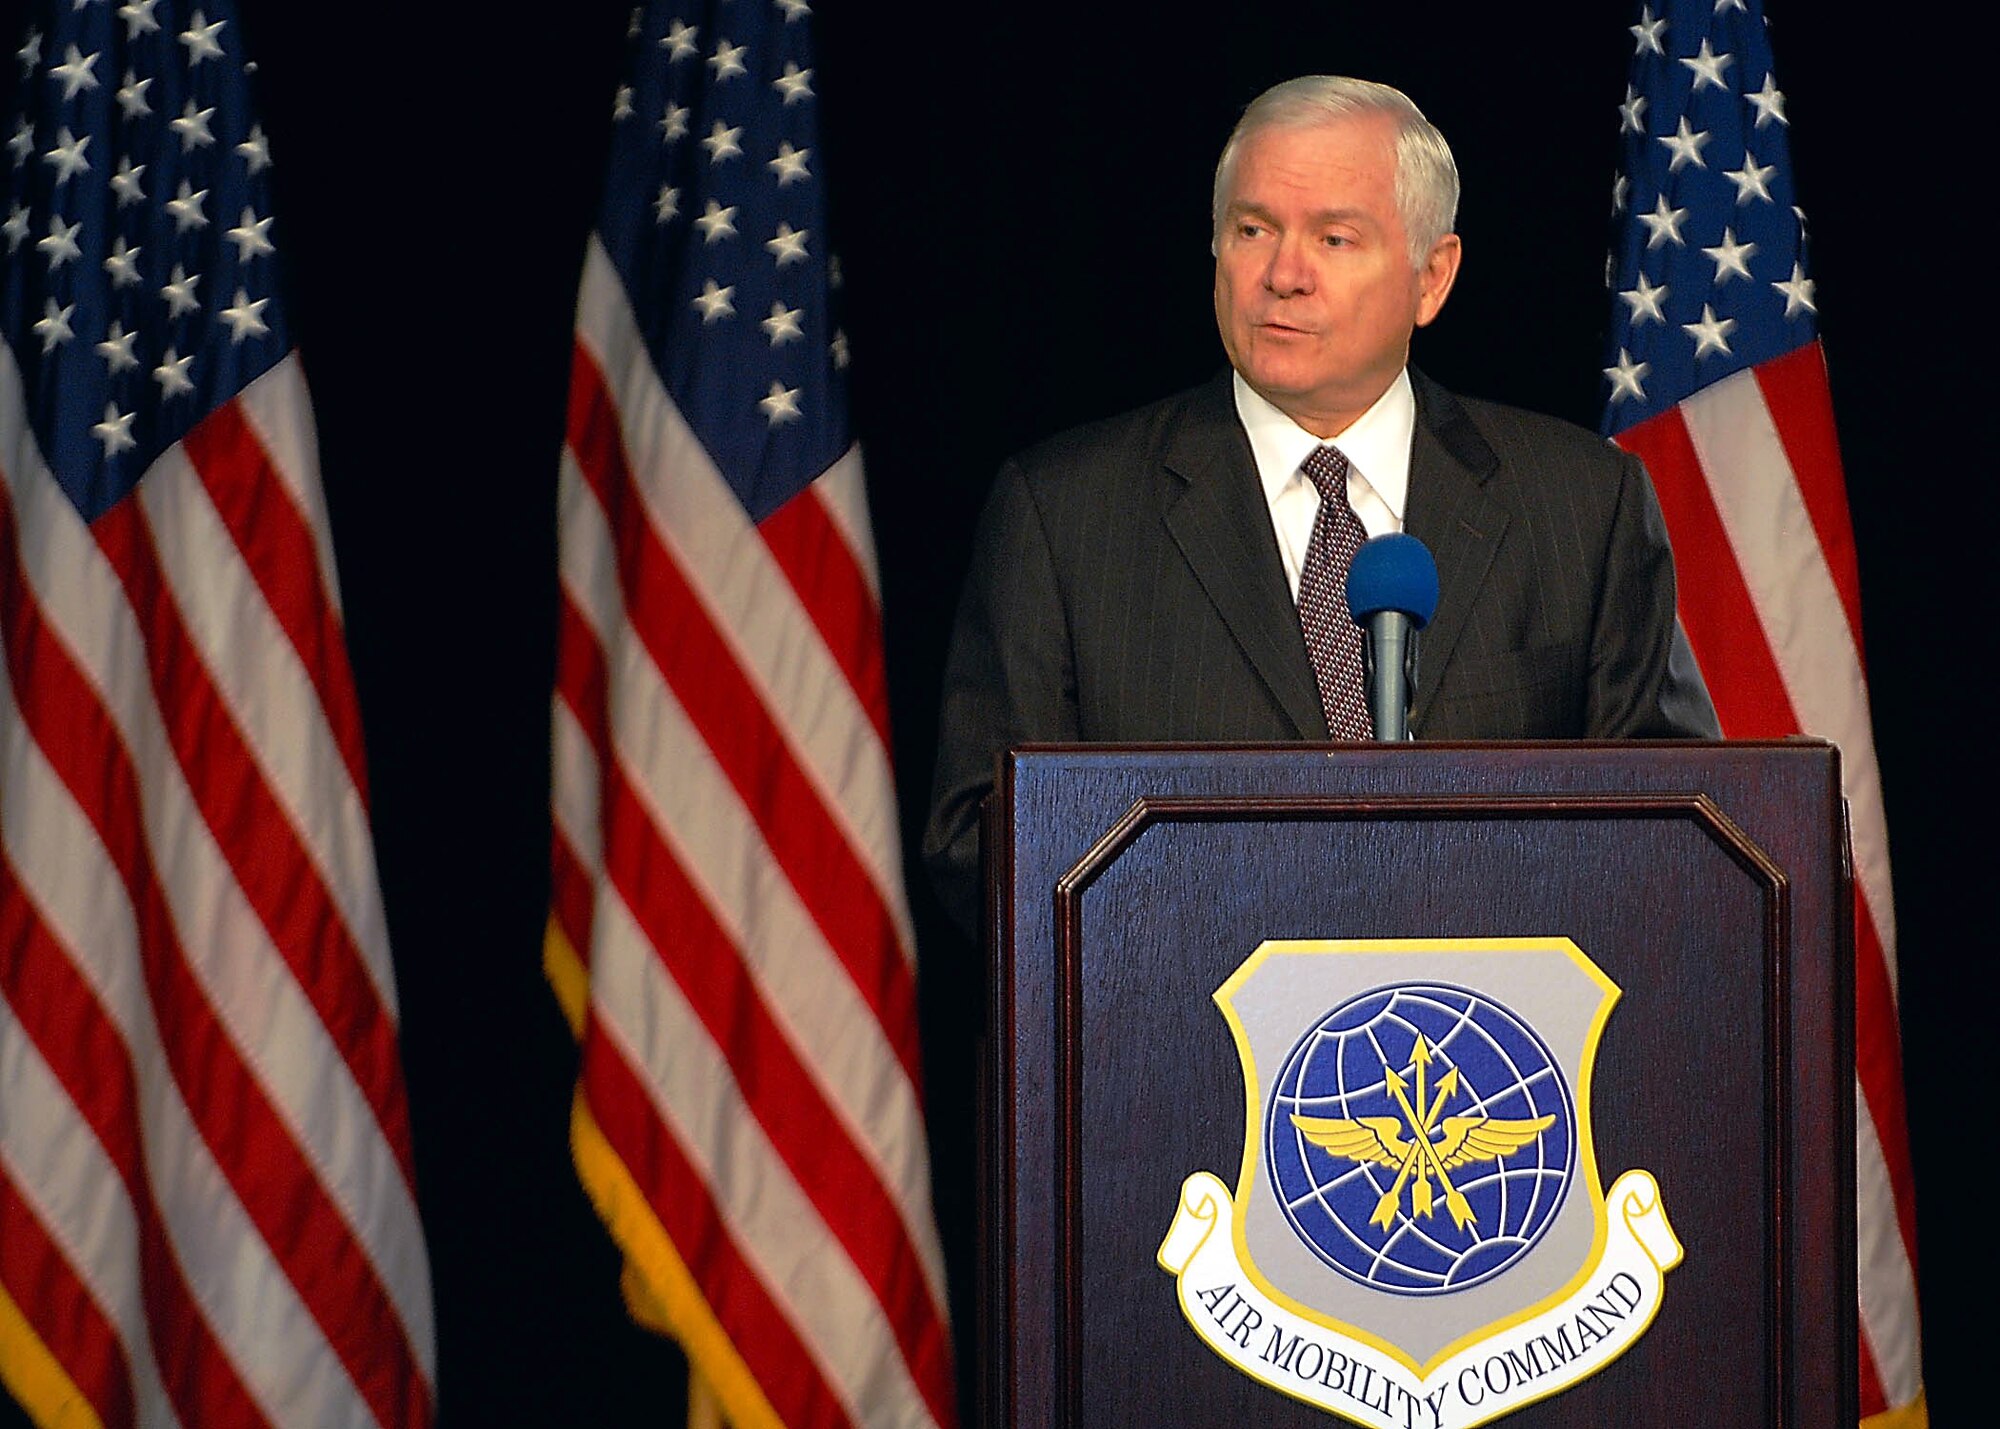 Robert Gates, U.S. Secretary of Defense, speaks to Airmen from Air Mobility Command June 10 at Scott AFB, Ill.  Secretary Gates visited AMC headquarters to address the recent resignations of Air Force senior leaders, thank Airmen for their service and answer their questions. (U.S. Air Force photo by Airman 1st Class Megan Gilliland)